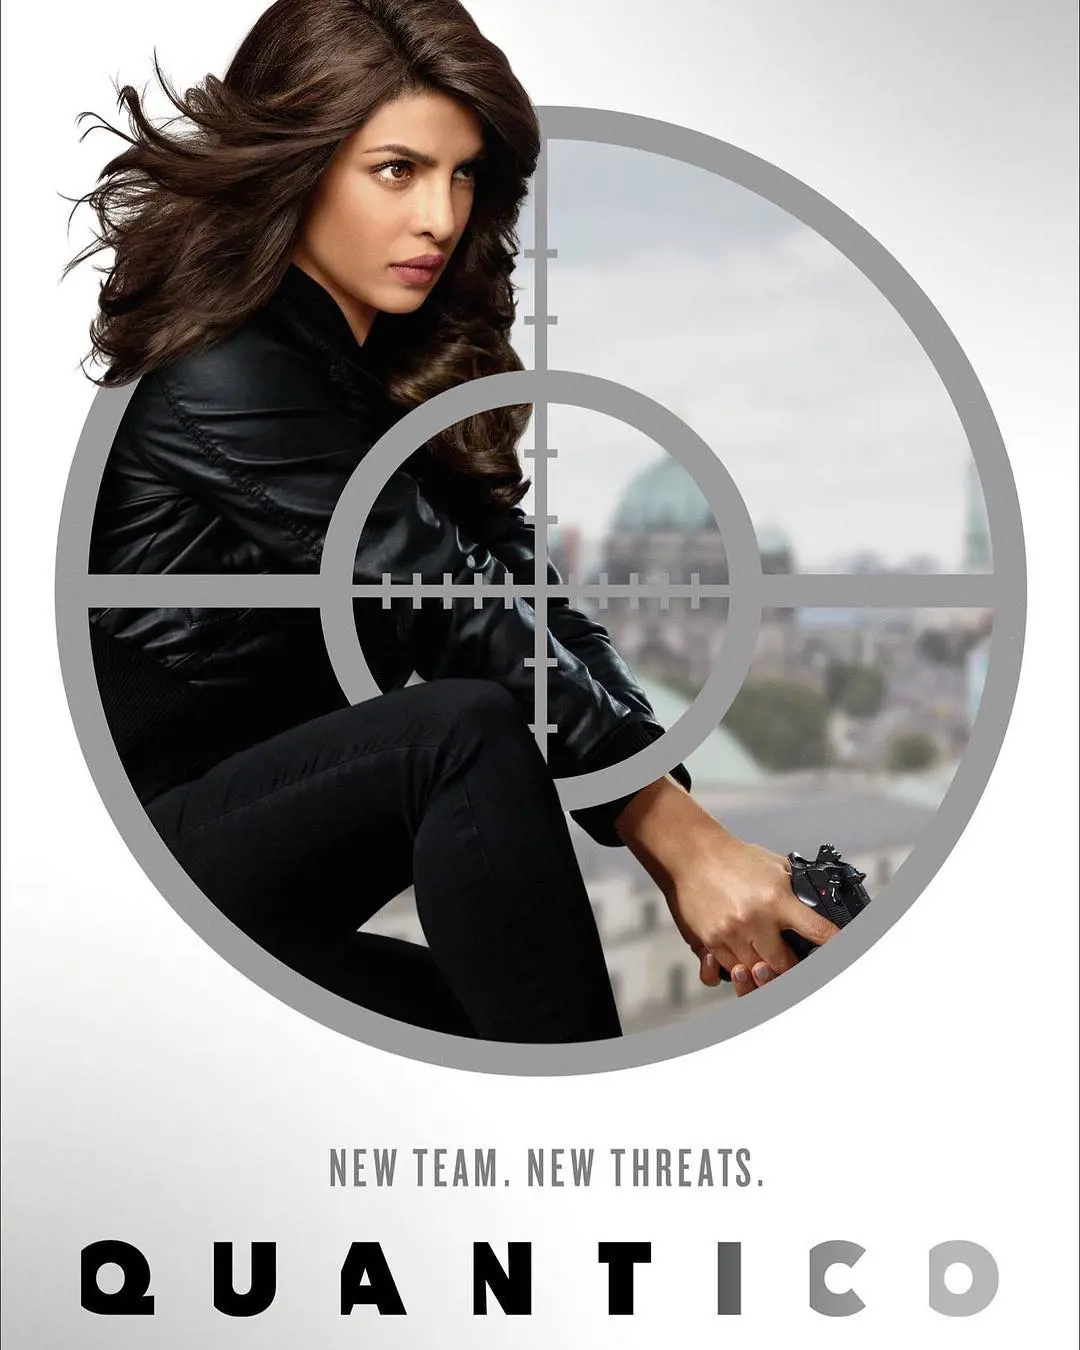 Quantico is an American thriller drama series, it was first premiered in ABC in the year 2015